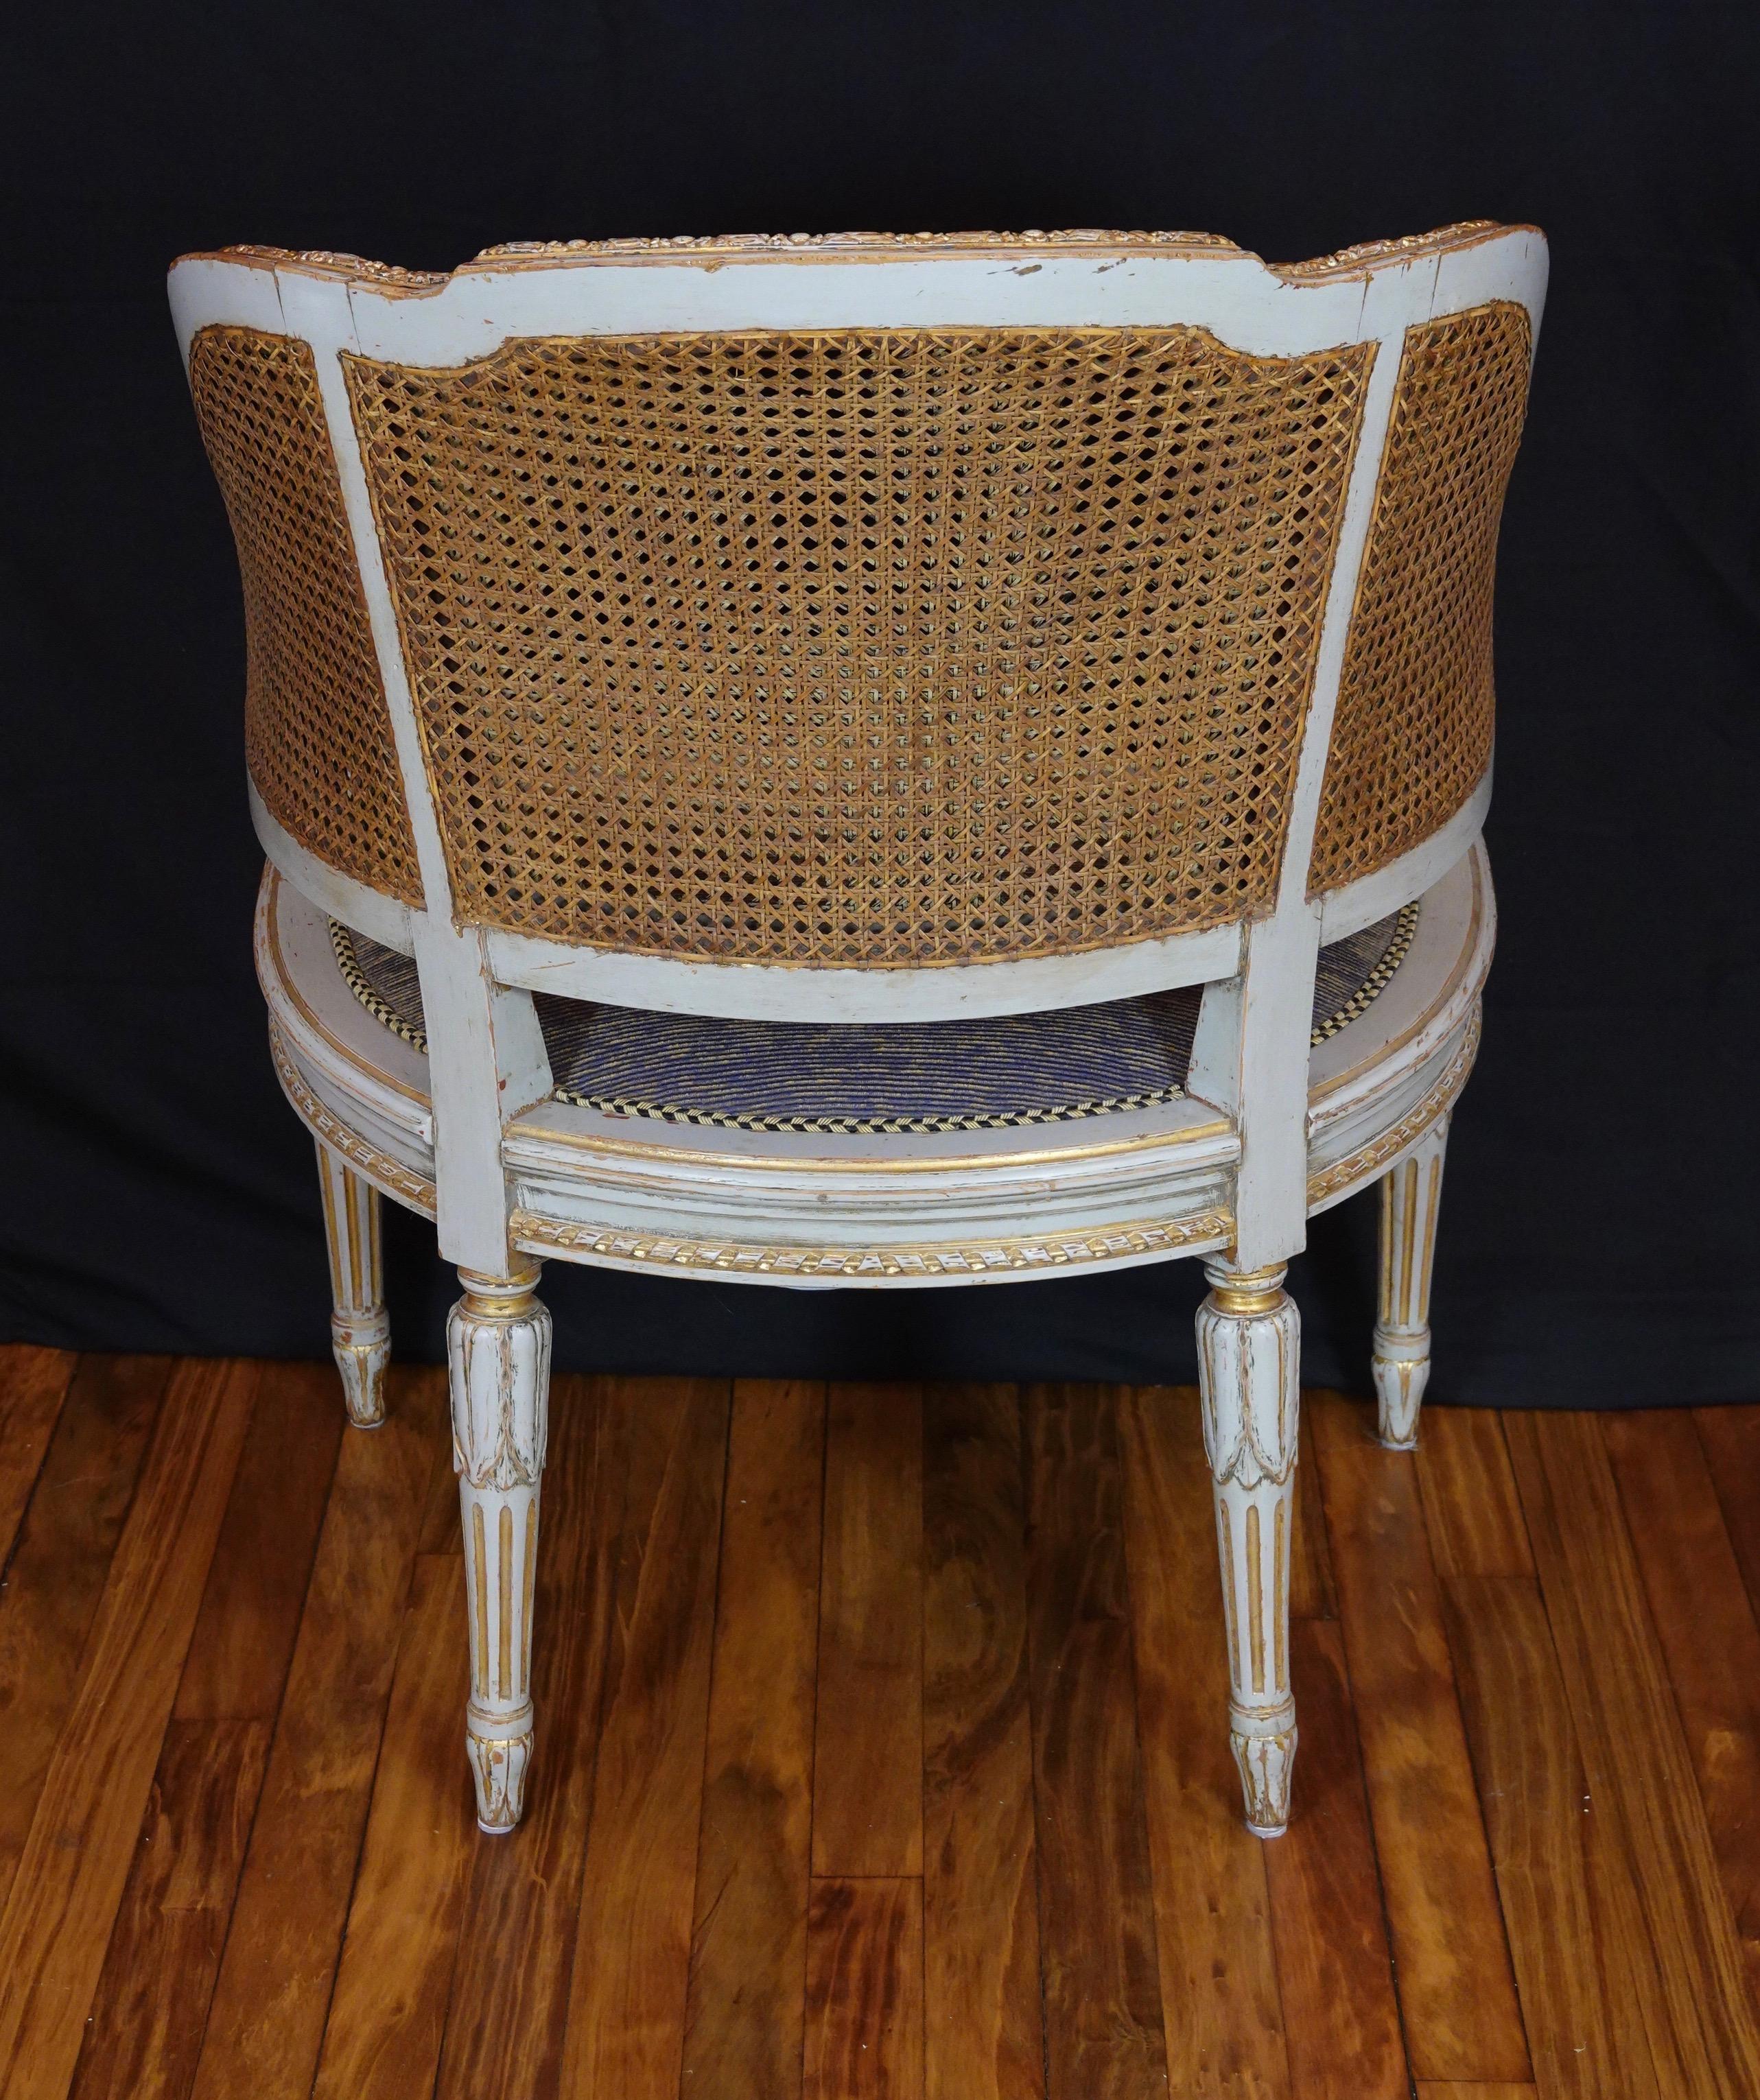 20th Century French Louis XVI Style Desk Chair with Caned Back and Upholstered Seat